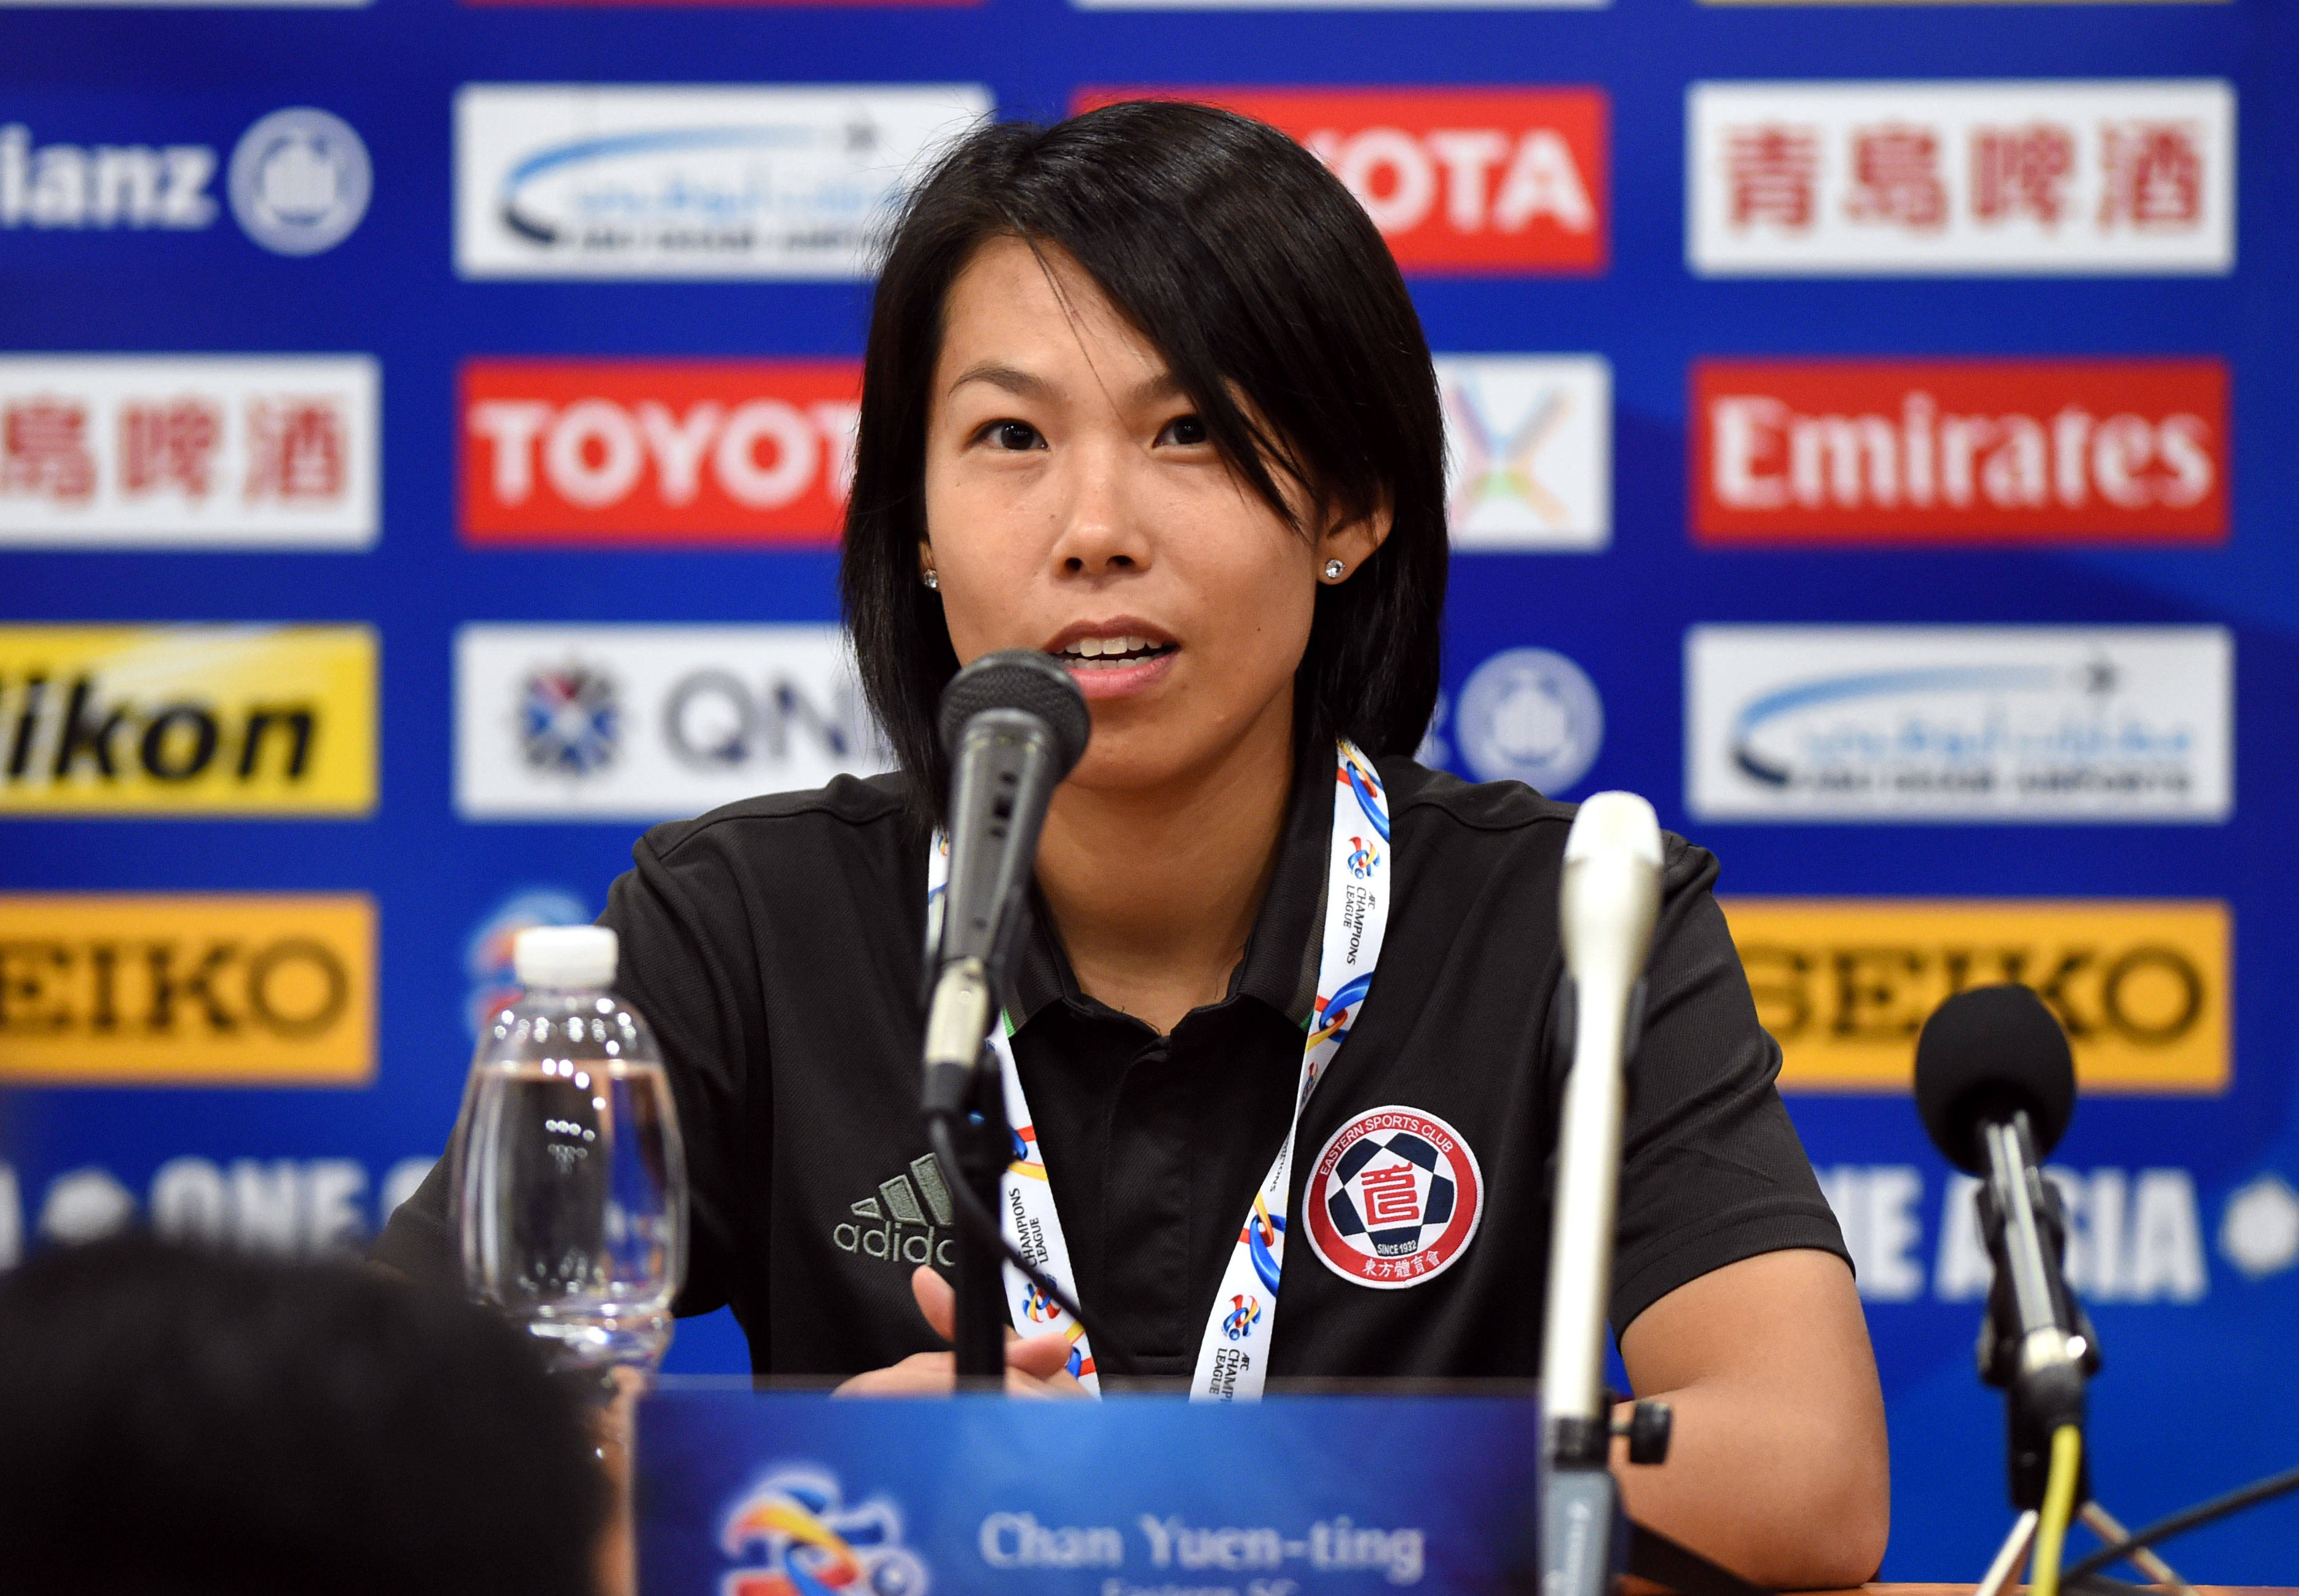 The Rapid Evolution of Women’s Football: An Interview with Chen Wanting, Member of the Women’s World Cup Technical Research Team